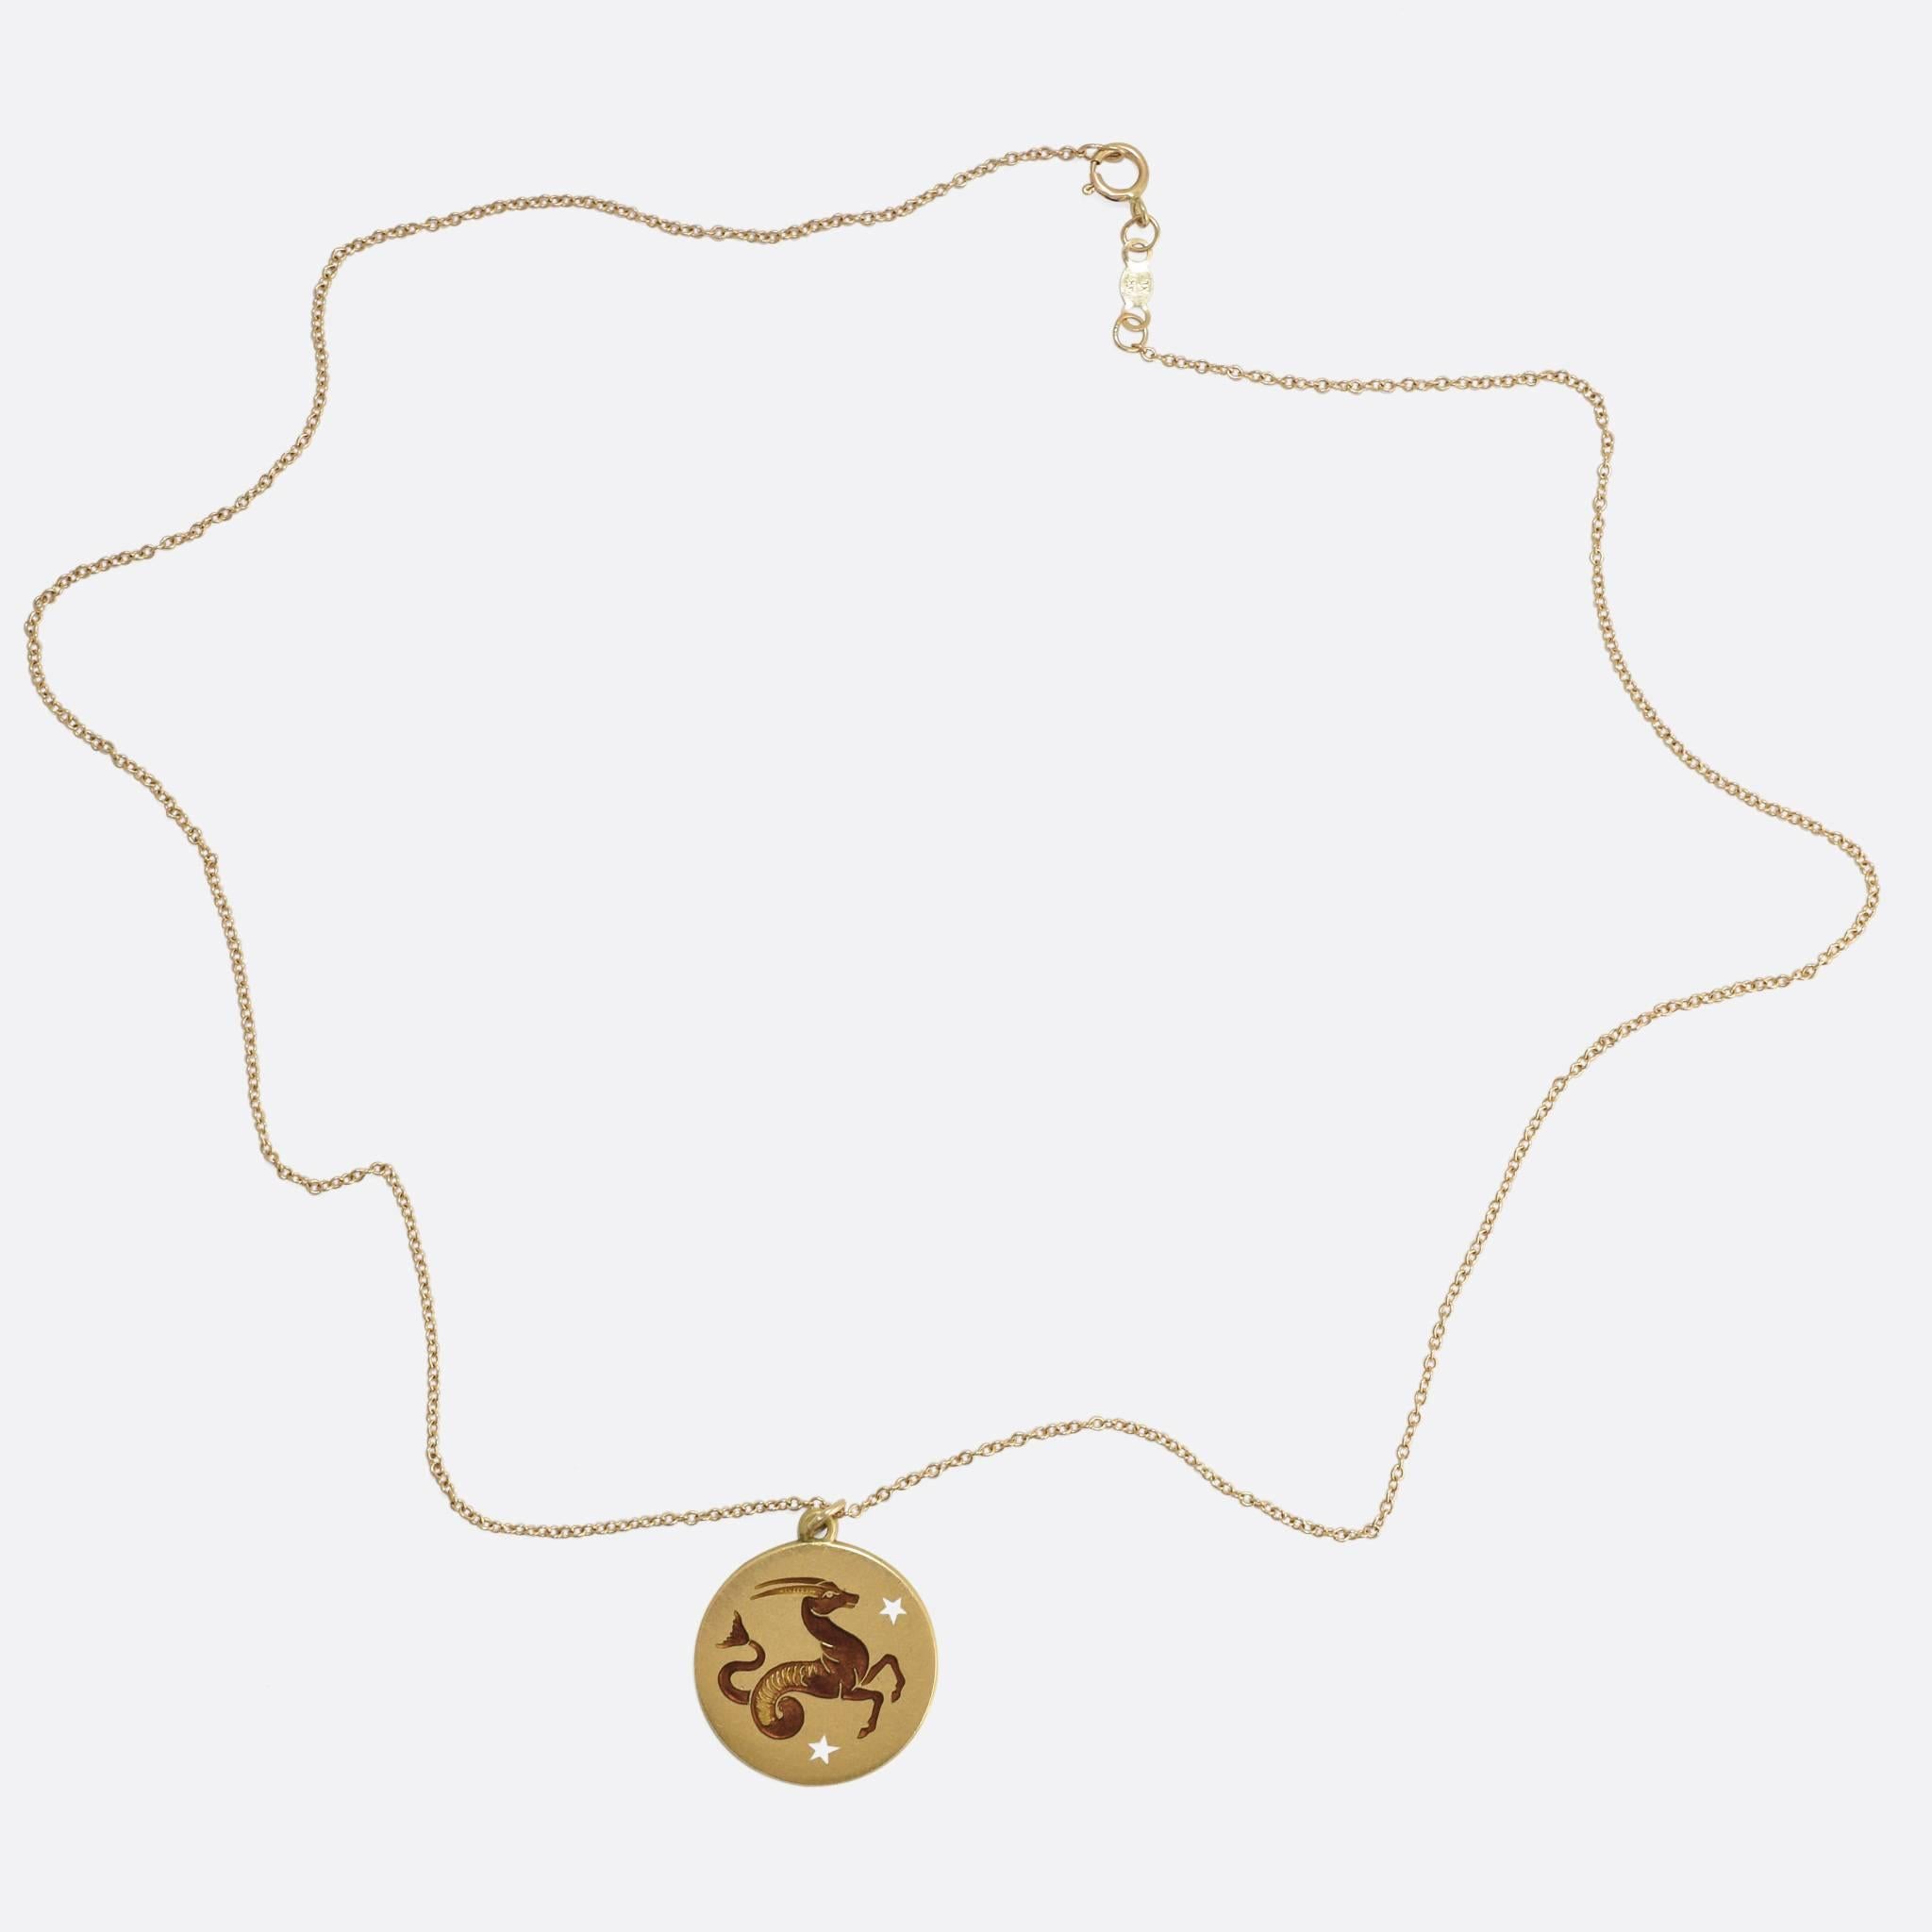 A seriously cool vintage Capricorn medallion pendant, modelled in 18k gold with superb vitreous enamelling. I'm a Capricorn, so how could I have resisted it? All of my discipline and self control goes out of the window when presented with